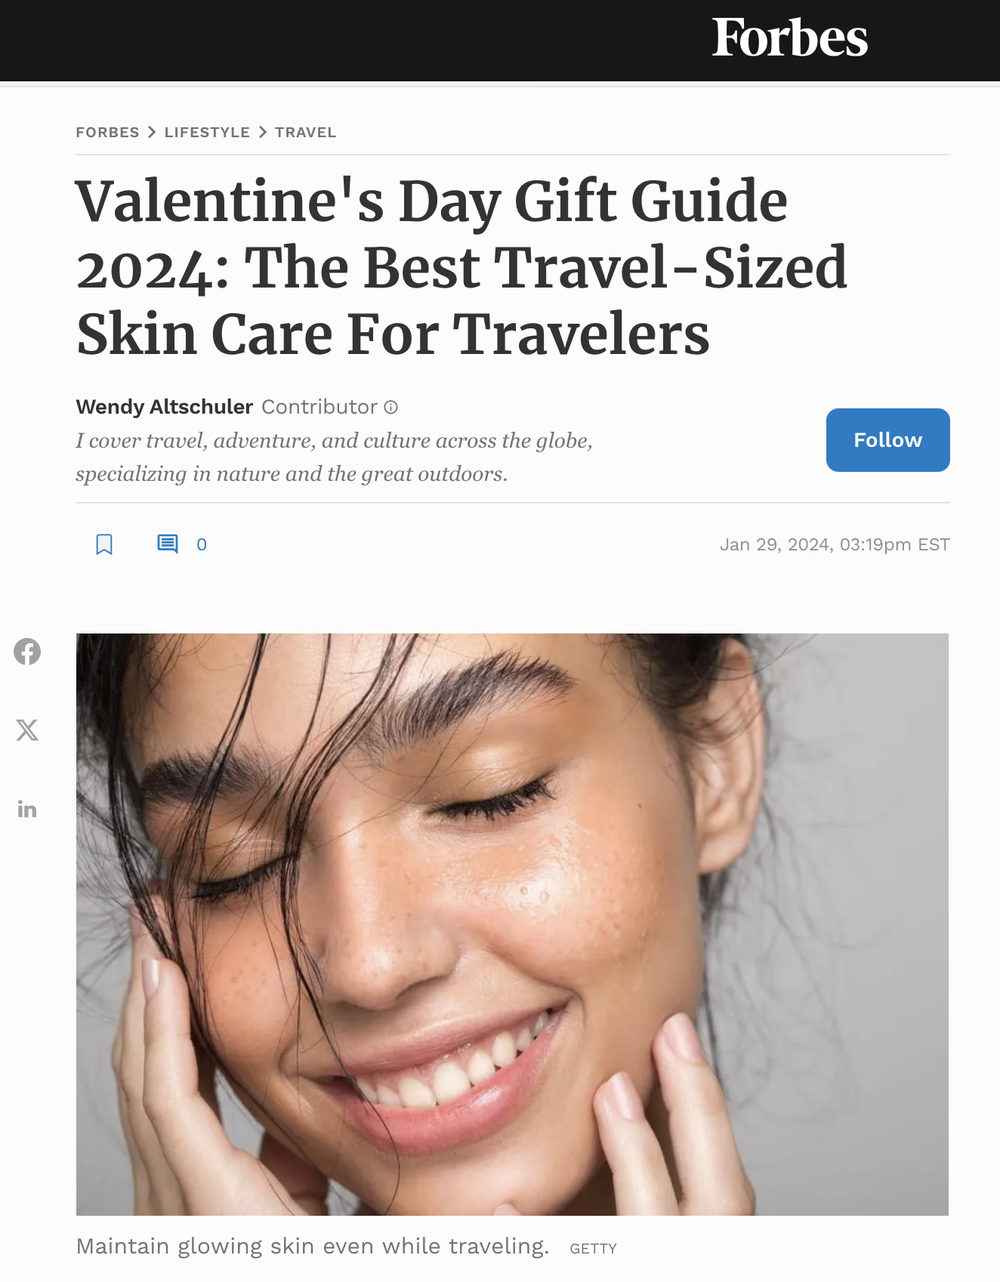 Valentine's Day Gift Guide 2024: The Best Travel-Sized Skin Care For Travelers